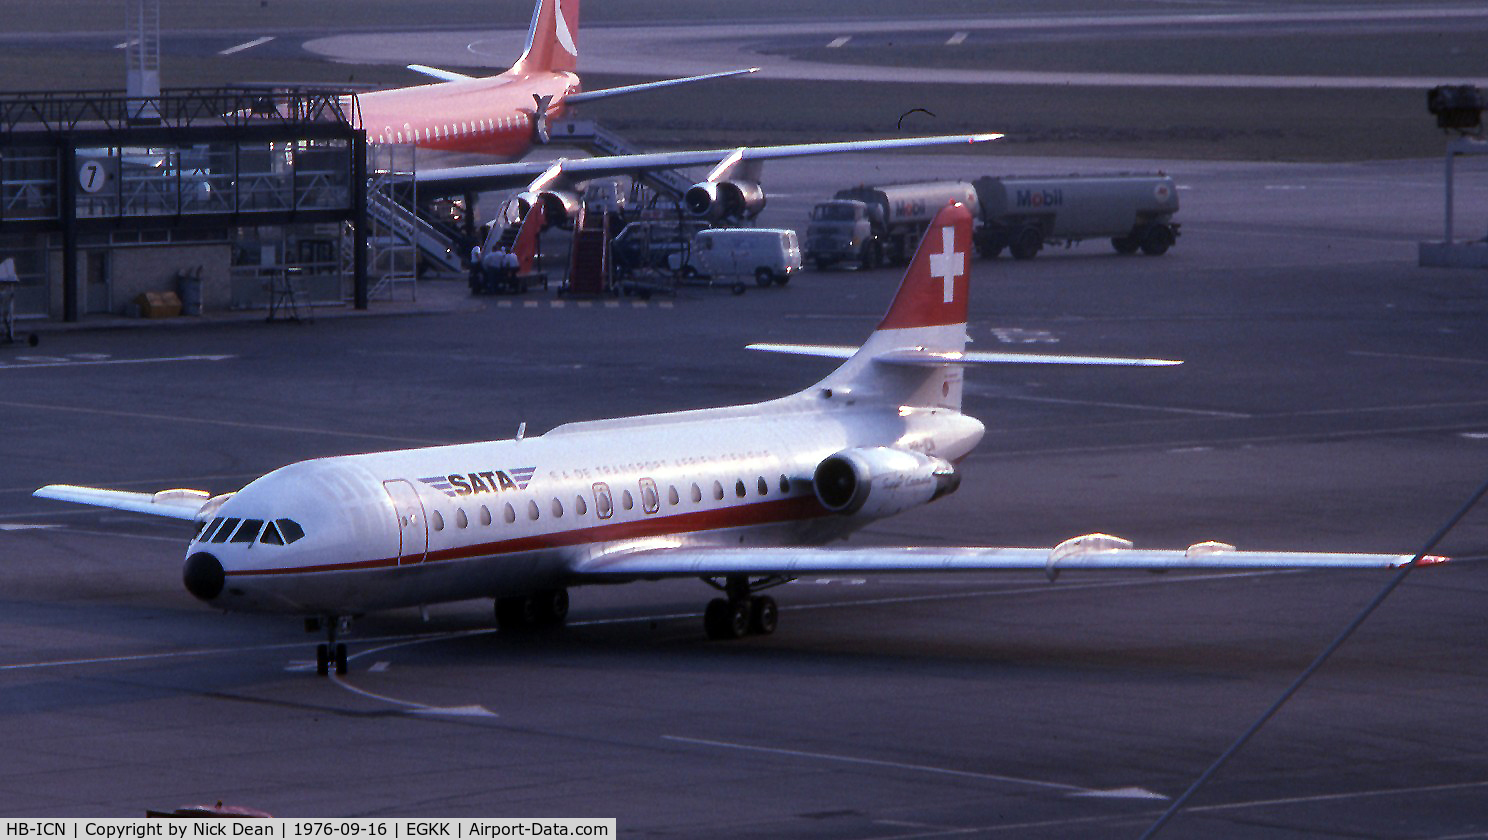 HB-ICN, 1968 Sud Aviation SE-210 Caravelle 10R C/N 253, The good old days/ Scanned from a slide from my early days of photography